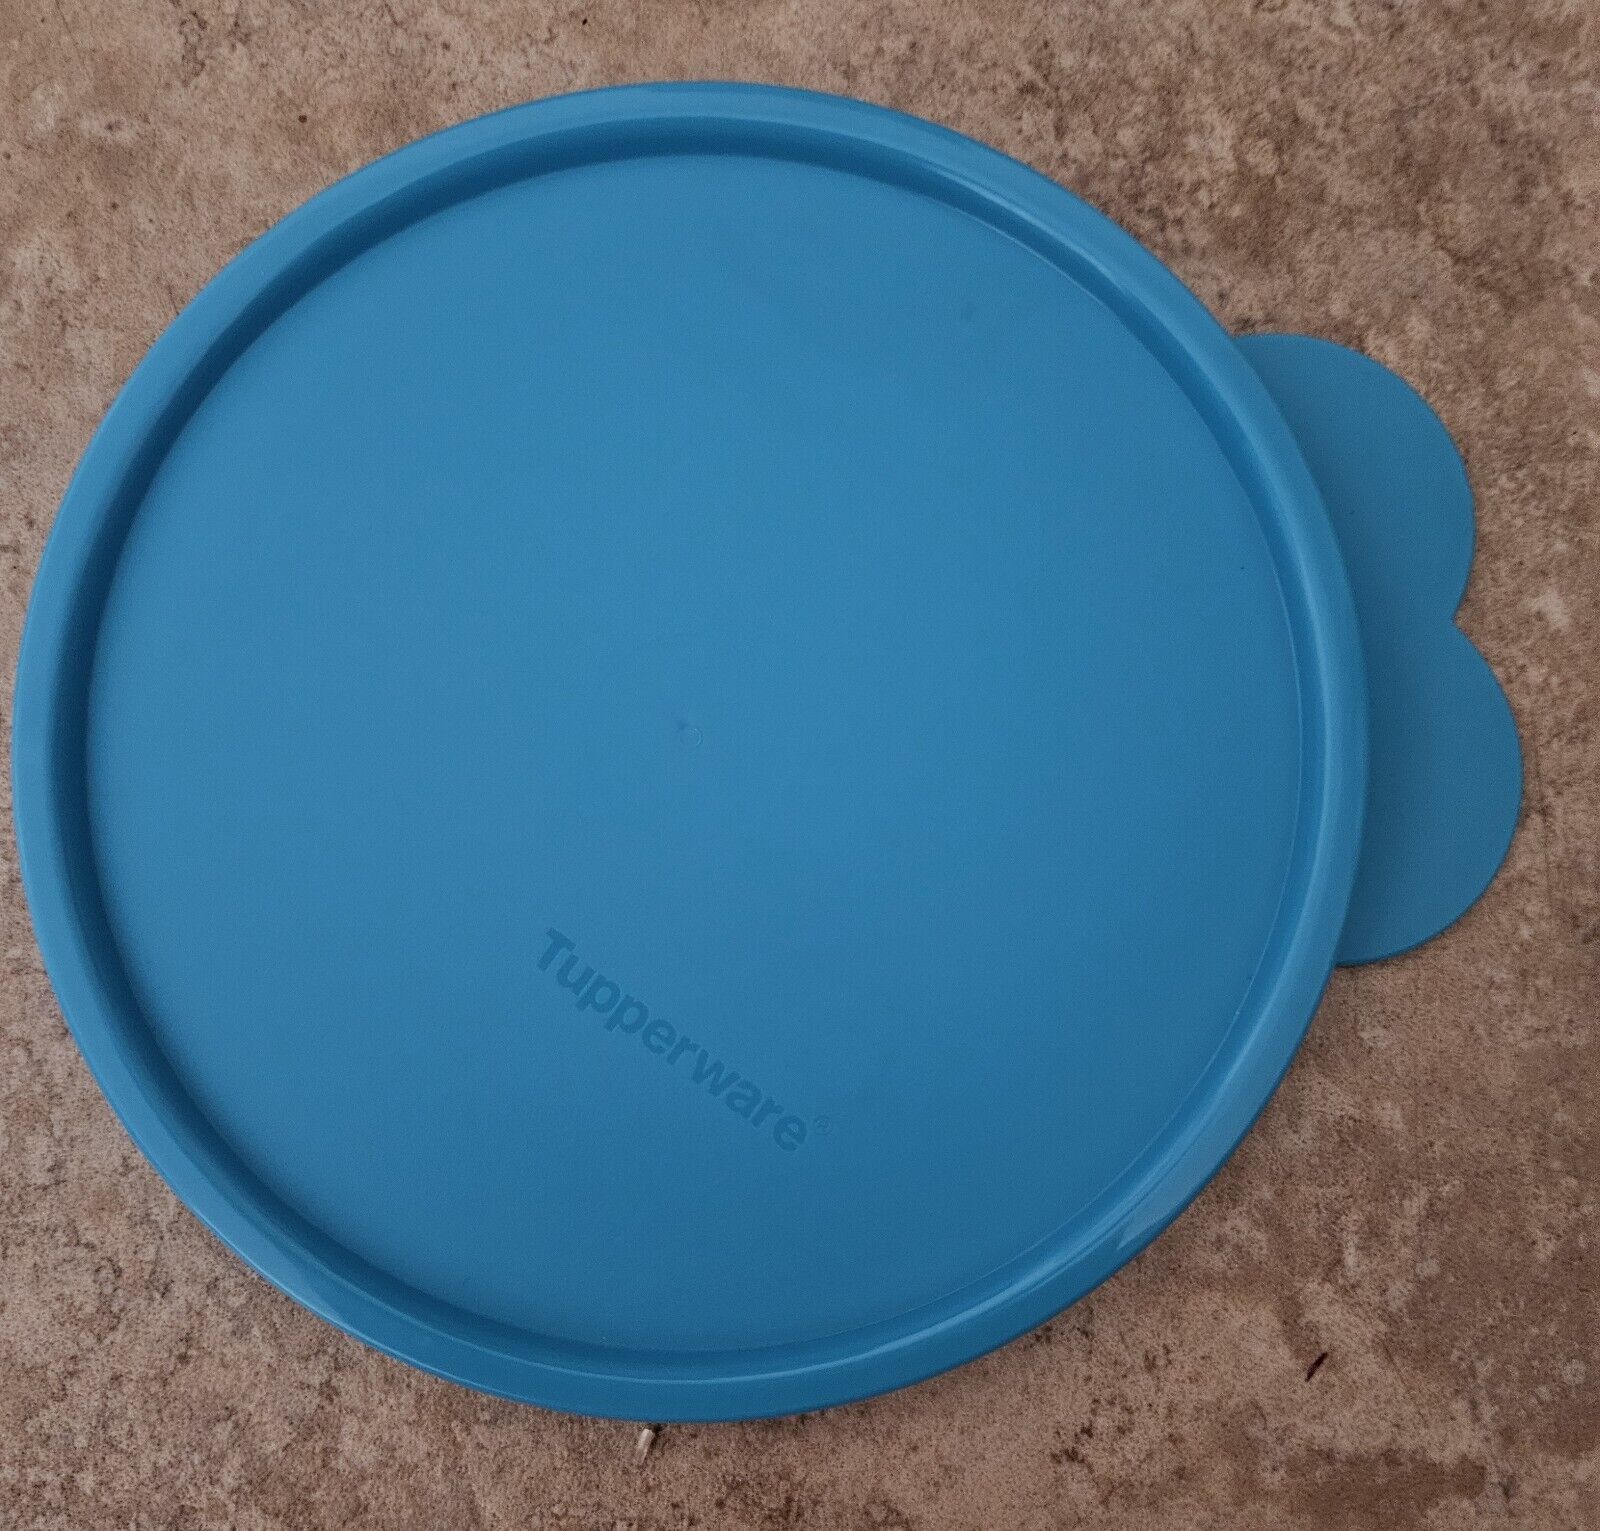 Tupperware Replacement Seal Lid with Tab 3131B-3 C Blue 1 Pc 6.25 Inch 